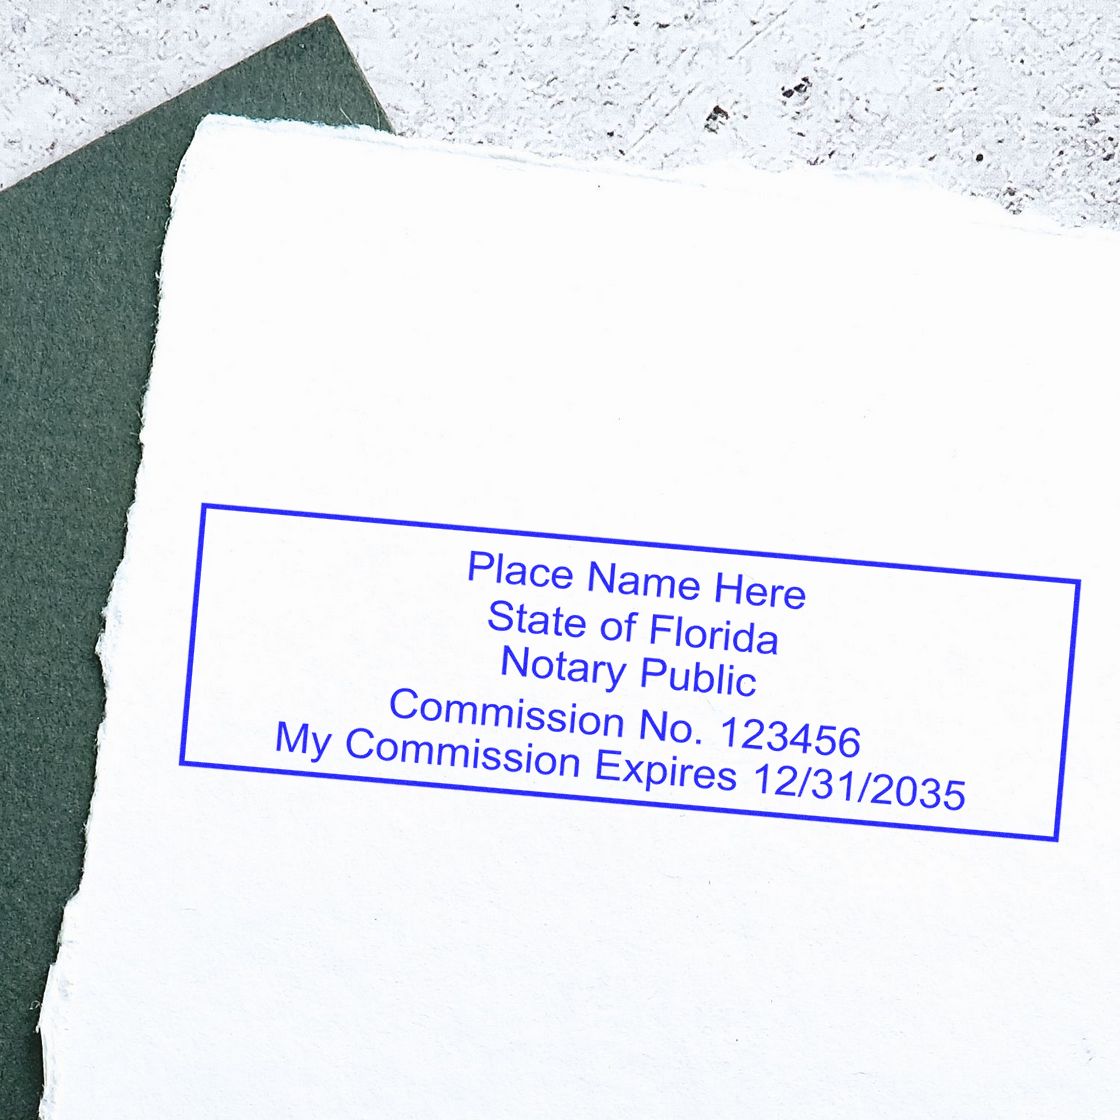 An alternative view of the Heavy-Duty Florida Rectangular Notary Stamp stamped on a sheet of paper showing the image in use